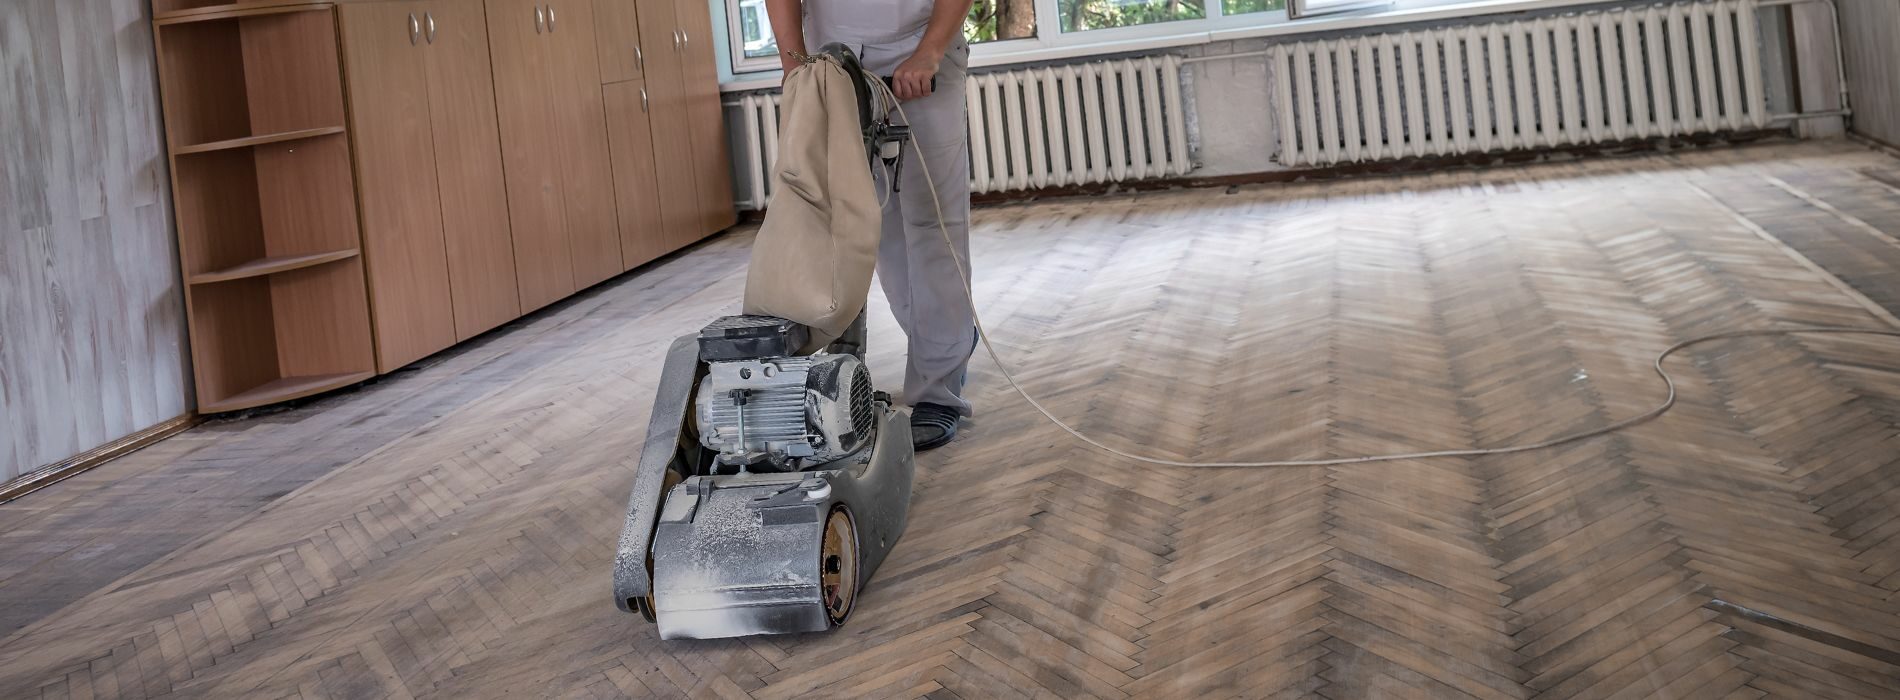 Experience professional herringbone floor sanding by Mr Sander® using the powerful Bona Belt Lite in Surbiton. With an effect of 2.2 kW, this sander operates at 230 V and 50 Hz. Measuring 200x750 mm, it ensures excellent coverage and precision.